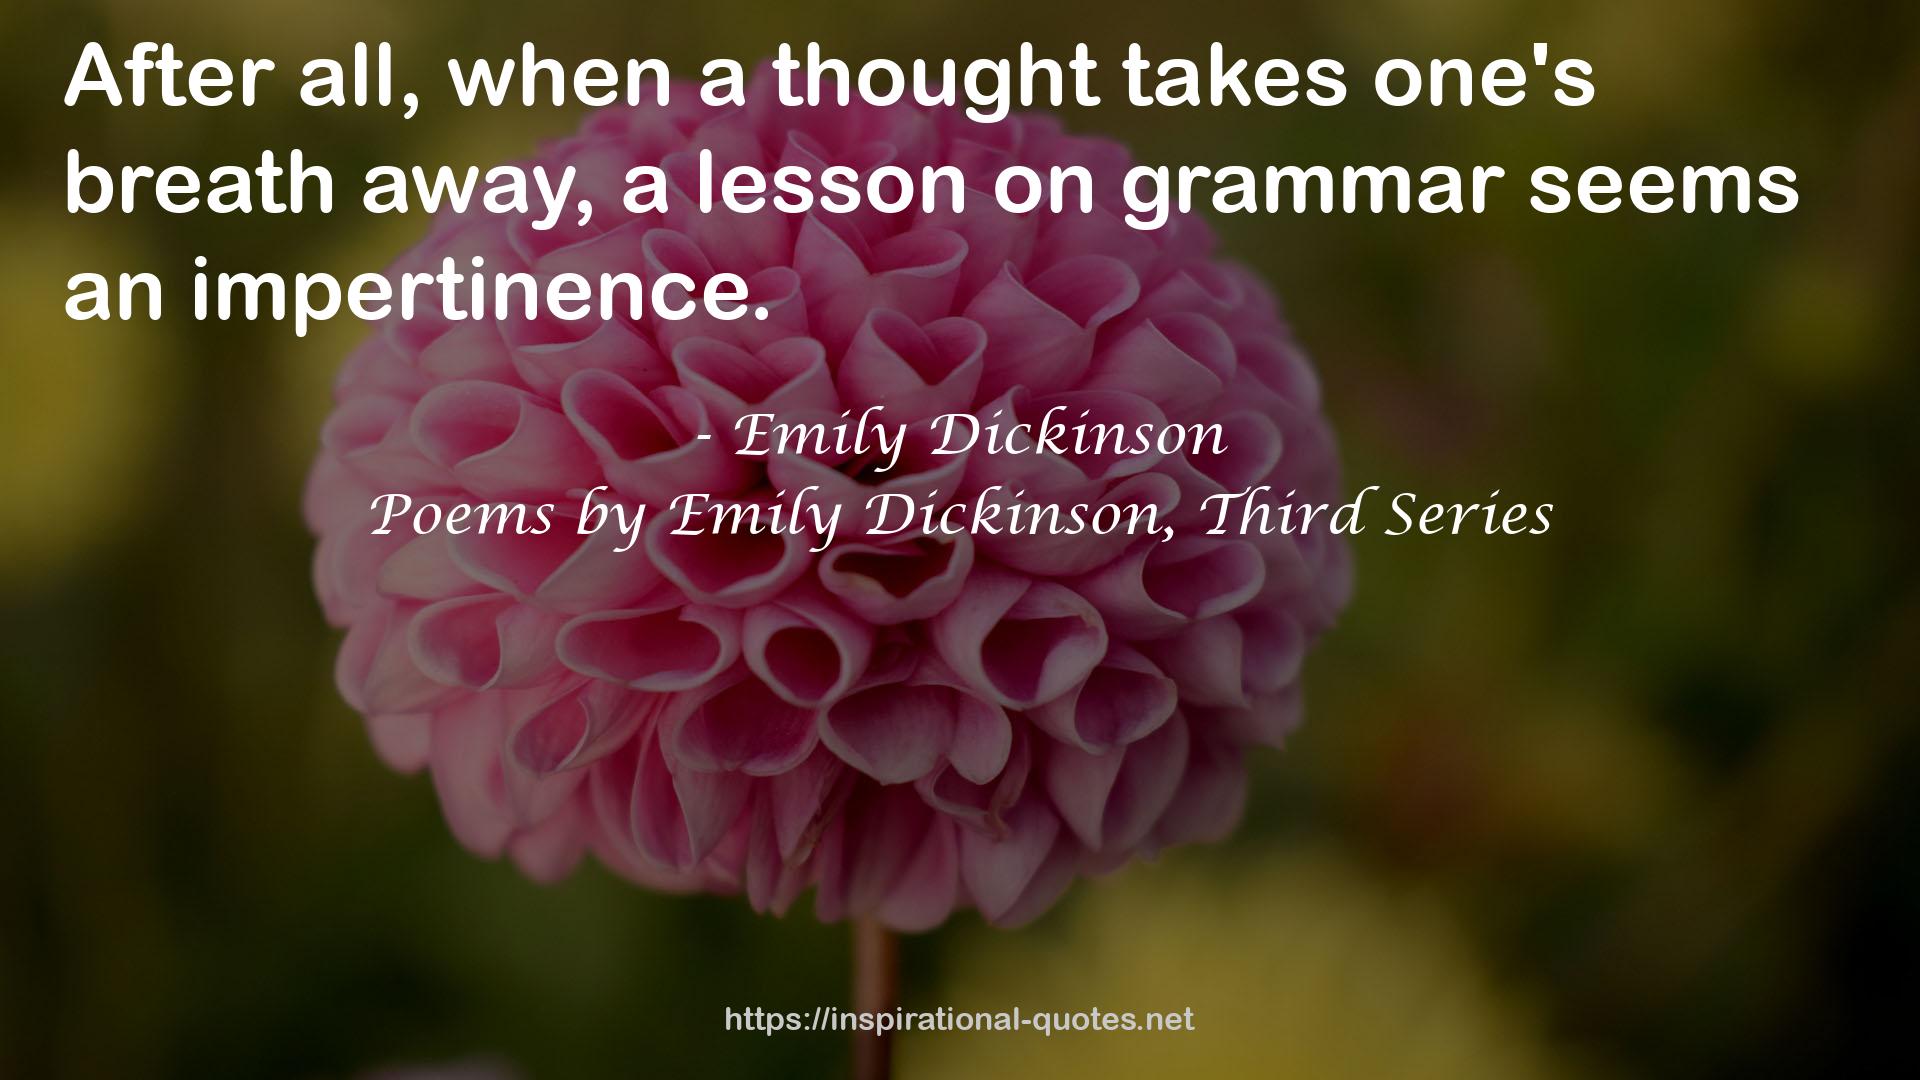 Poems by Emily Dickinson, Third Series QUOTES